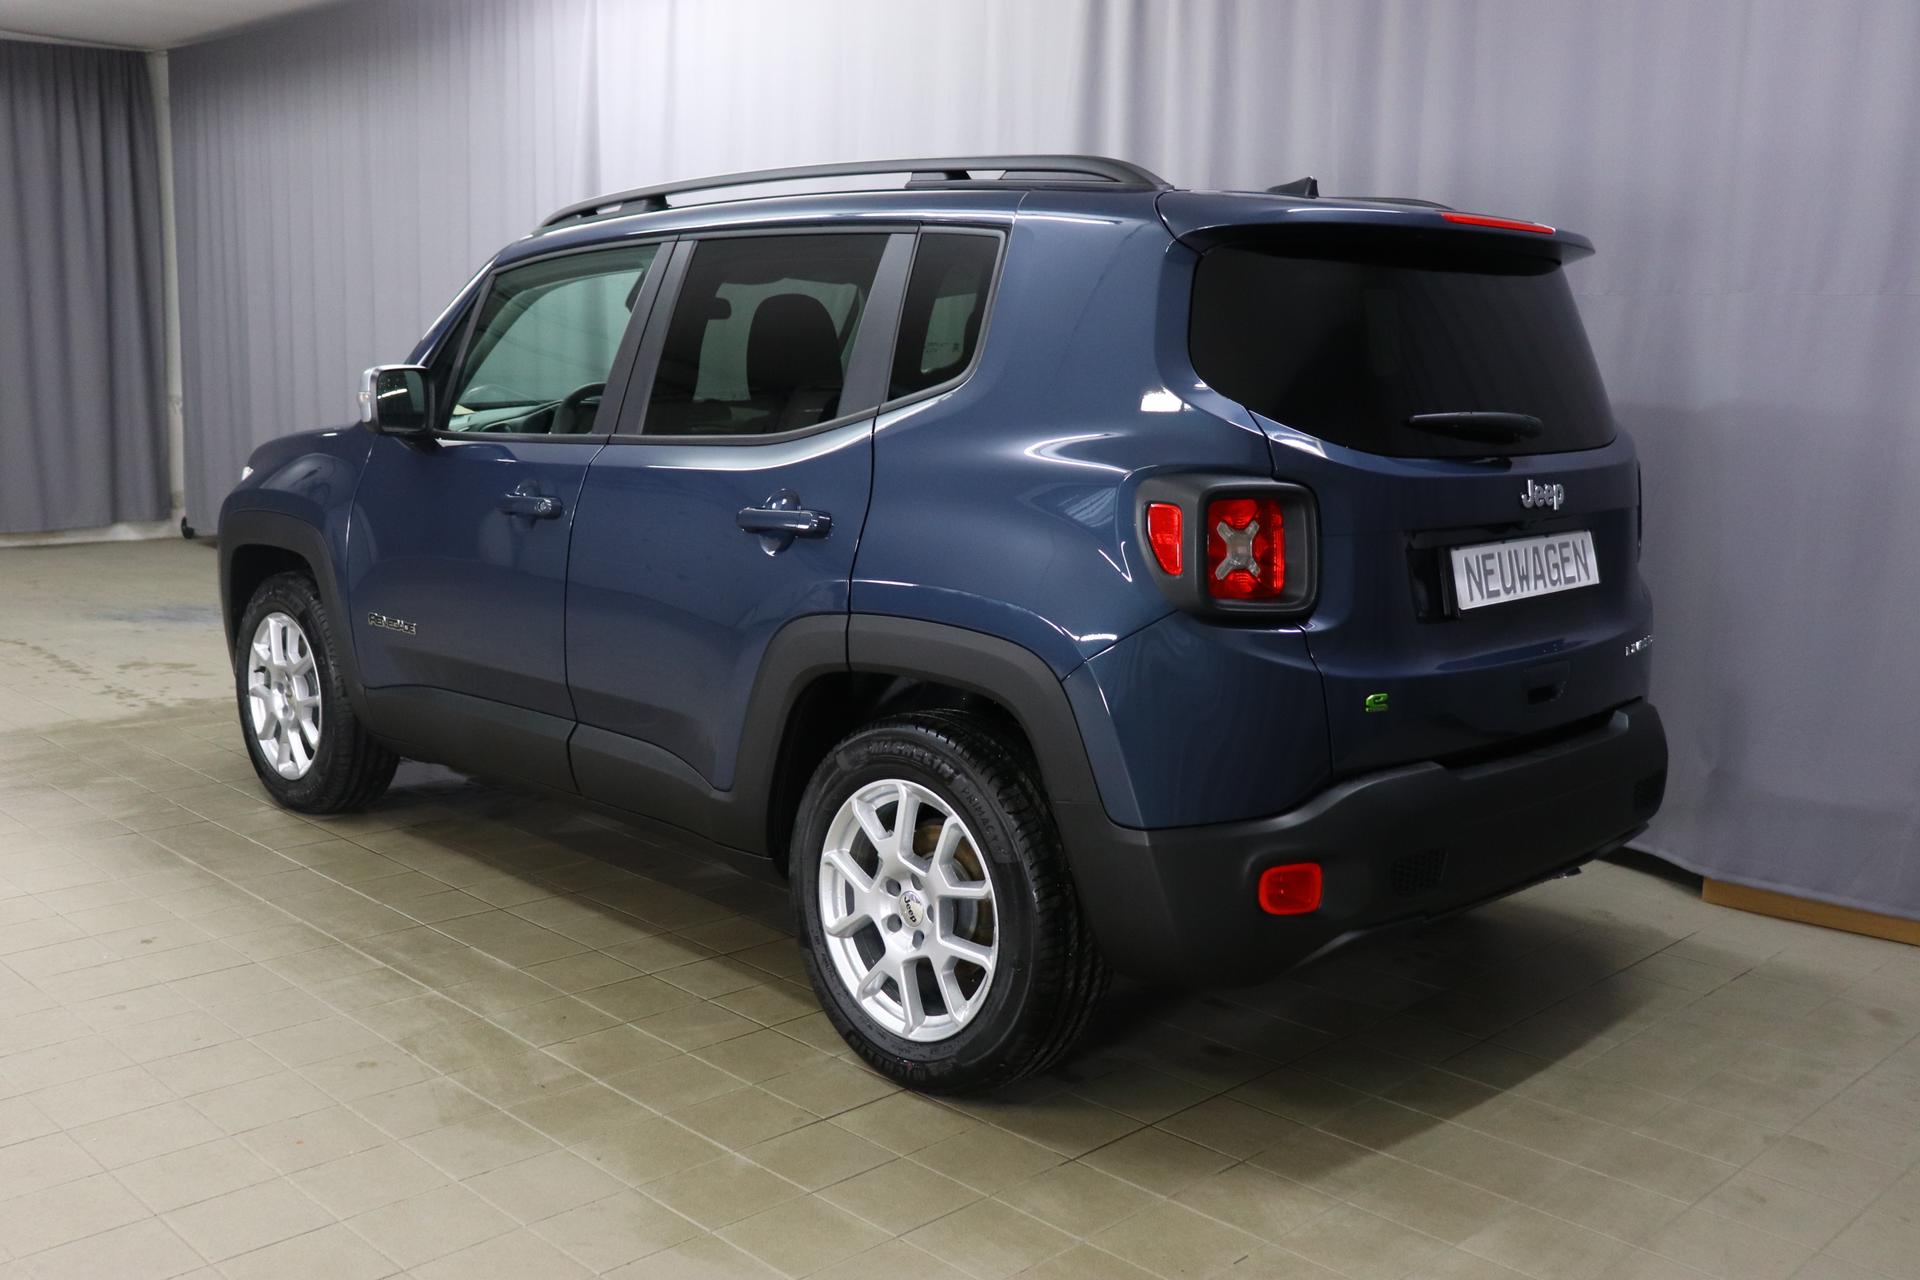 Jeep Renegade 1.5 T4 DCT7 e-Hybrid Limited   1469   96 kW435 Blue Shade	020 Stoff Schwarz